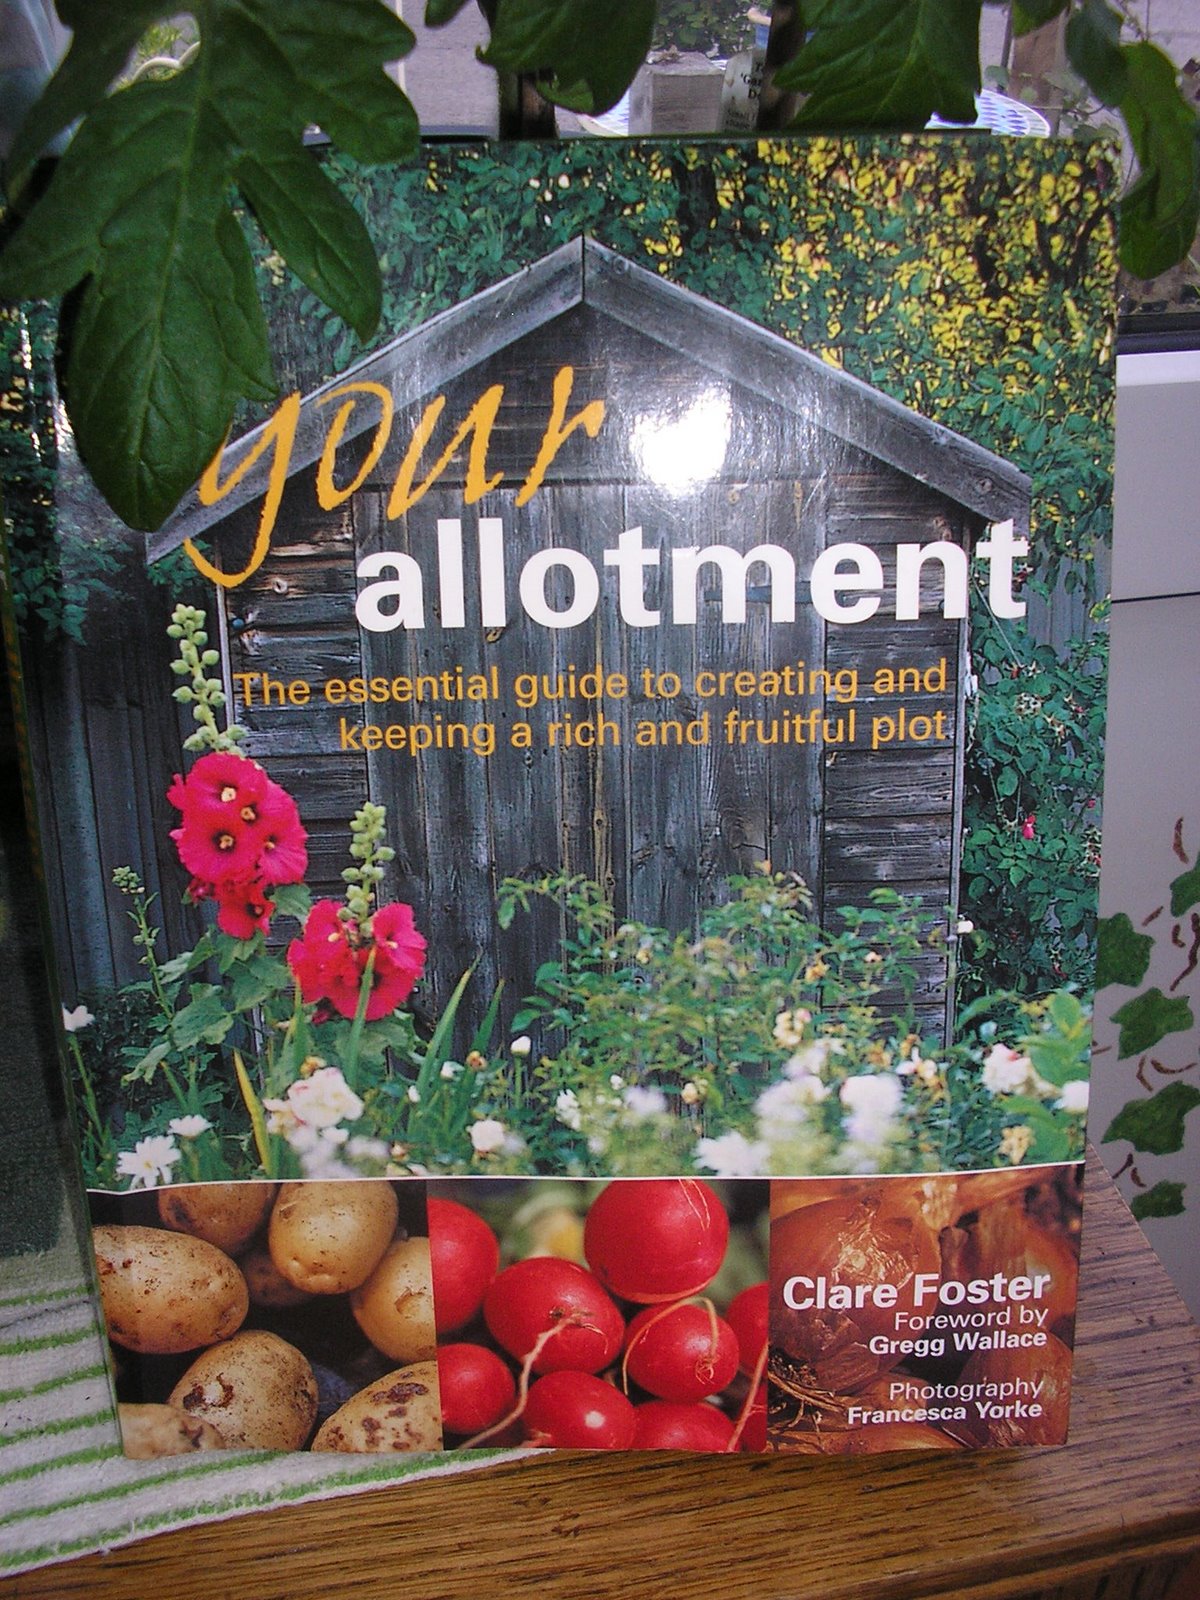 "YOUR ALLOTMENT" by Clare Foster